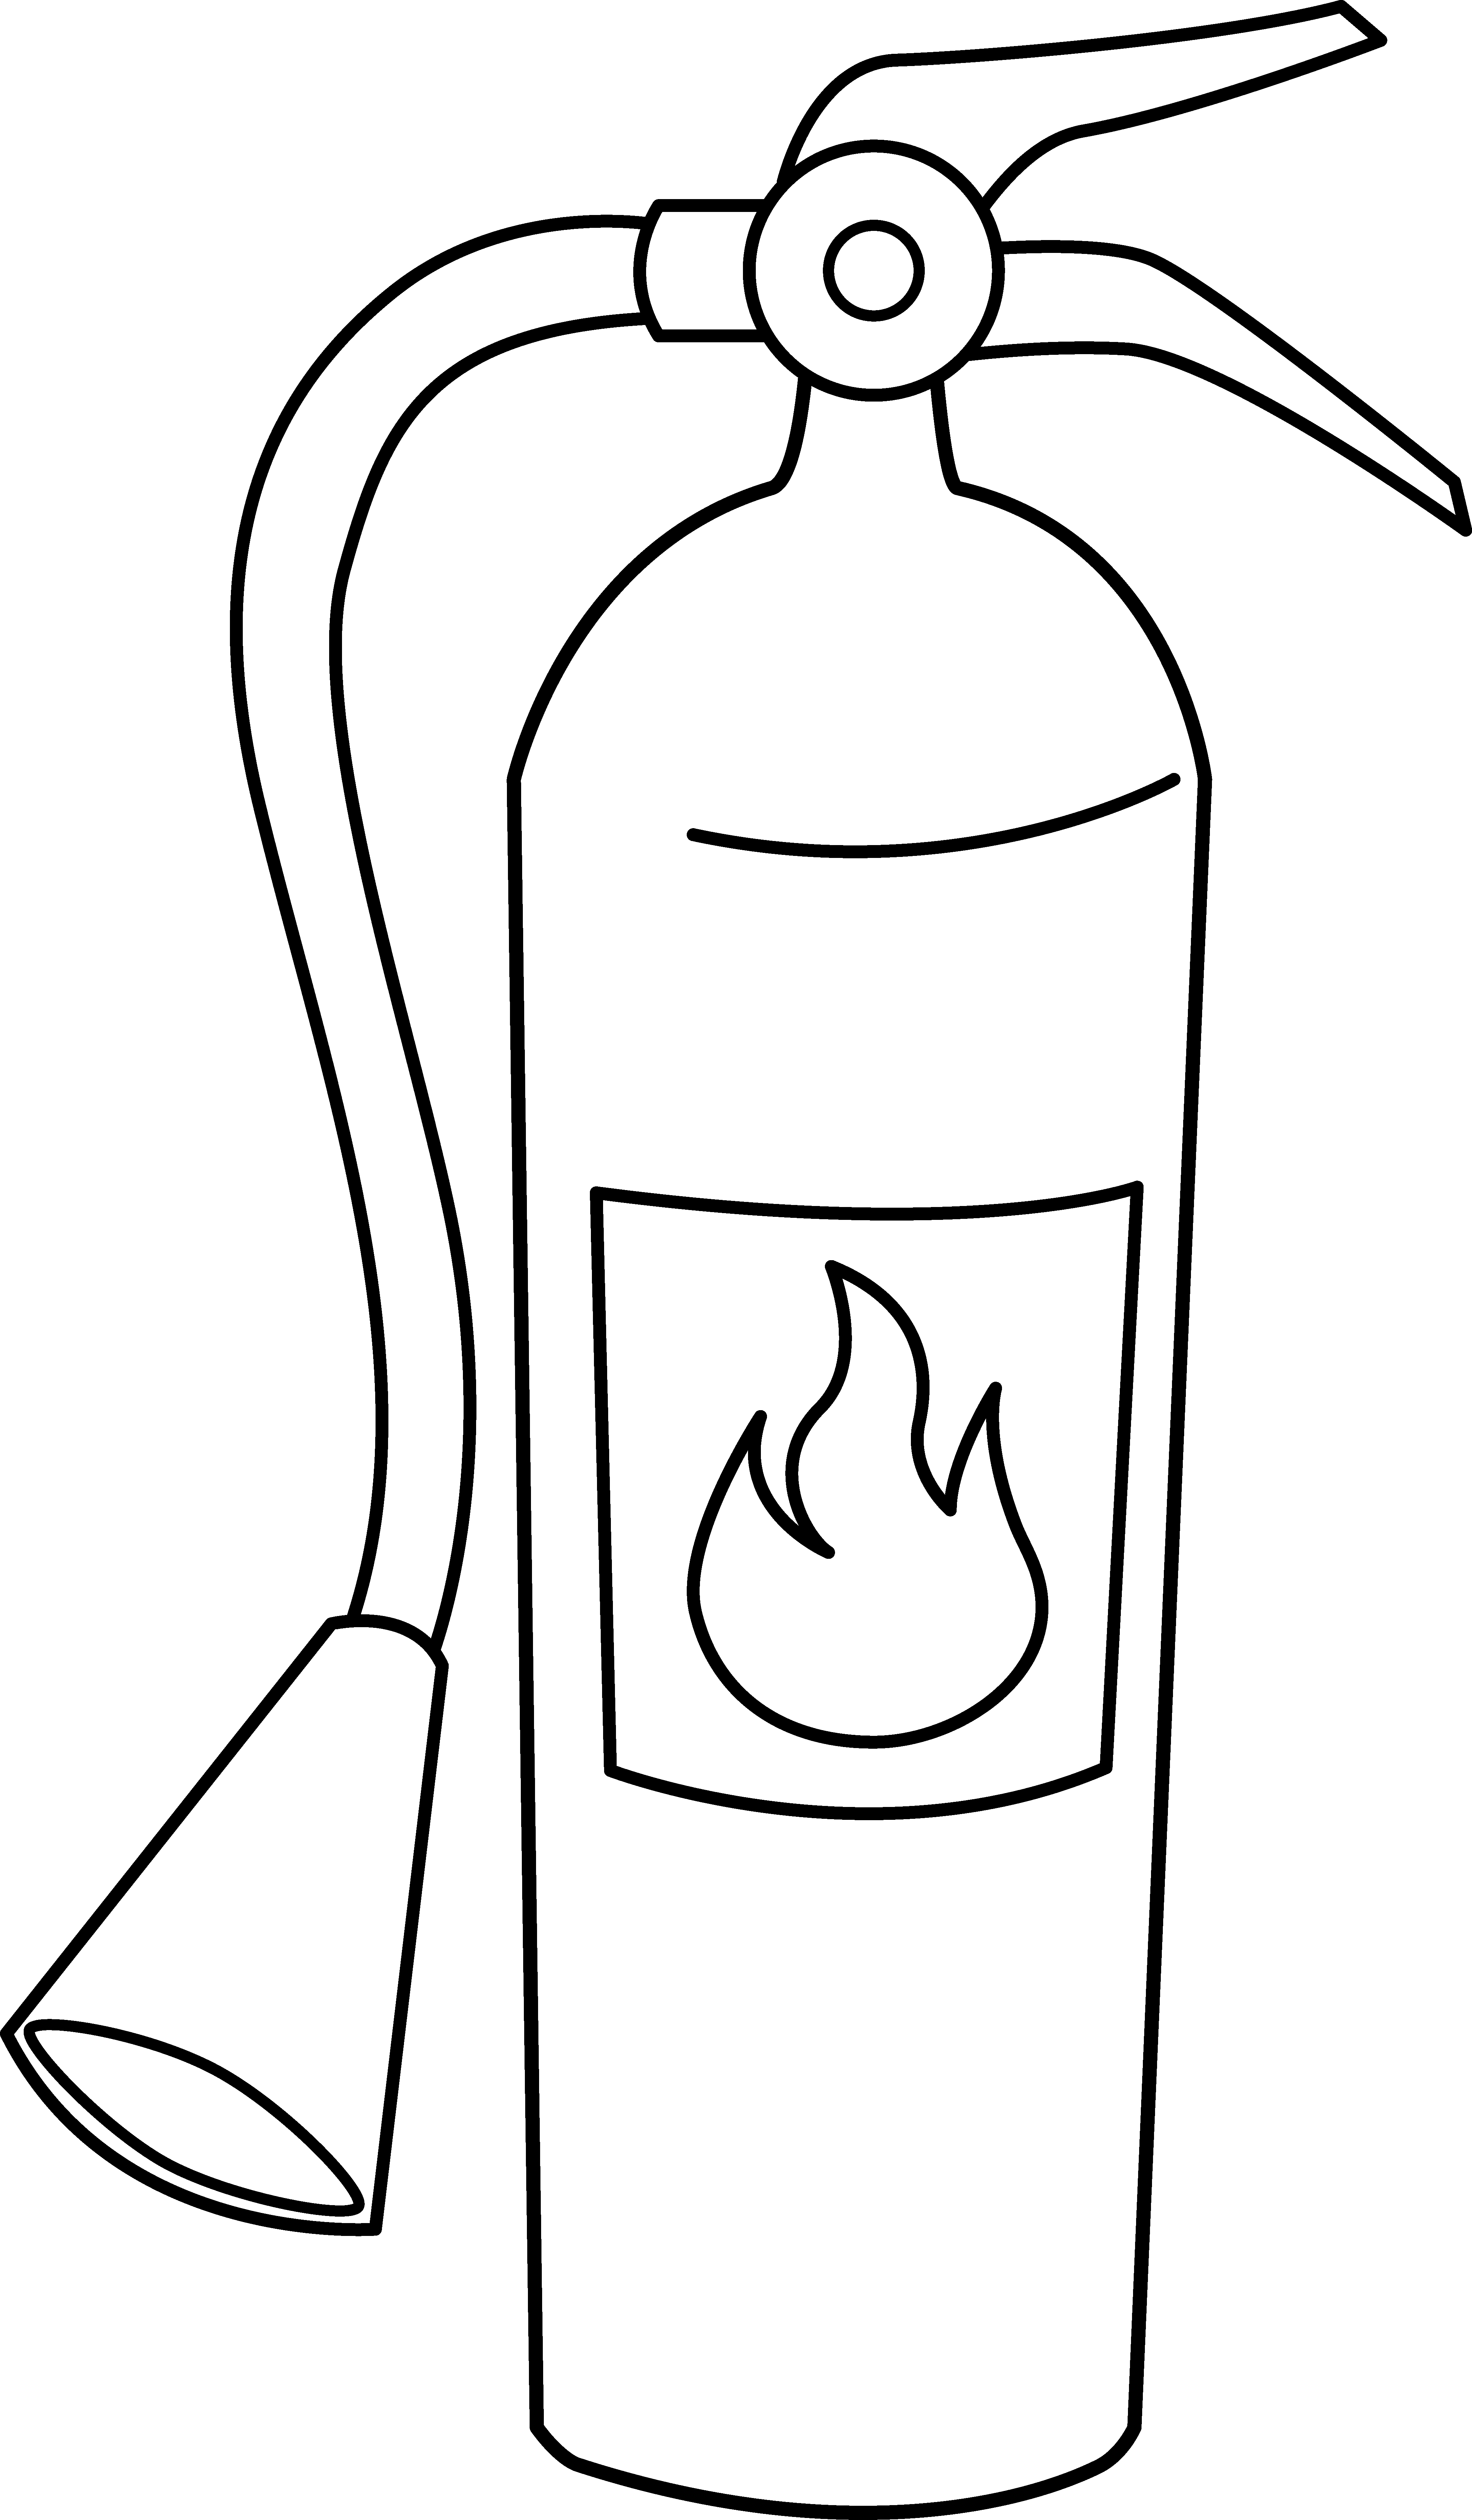 Fire draw pencil in. Welding clipart black and white